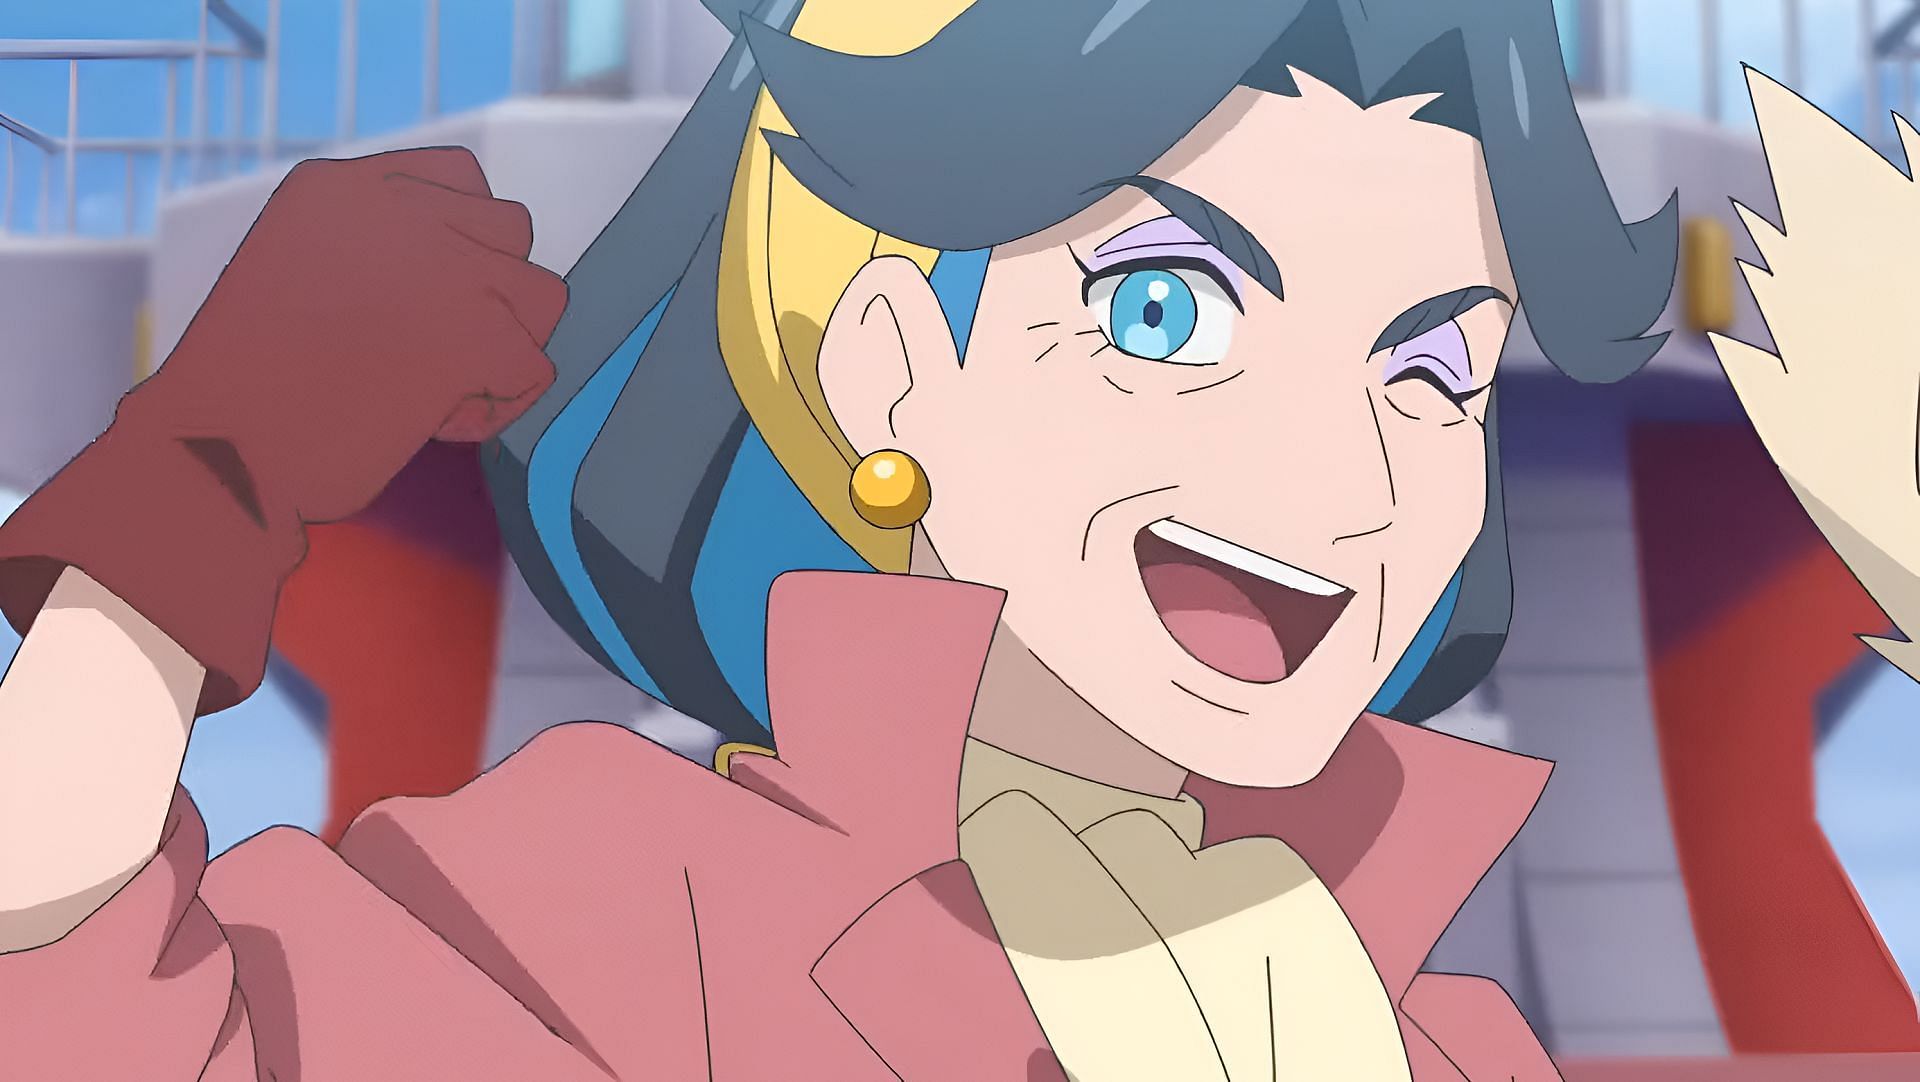 Diana challenges Liko and Roy to a battle (Image via The Pokemon Company)